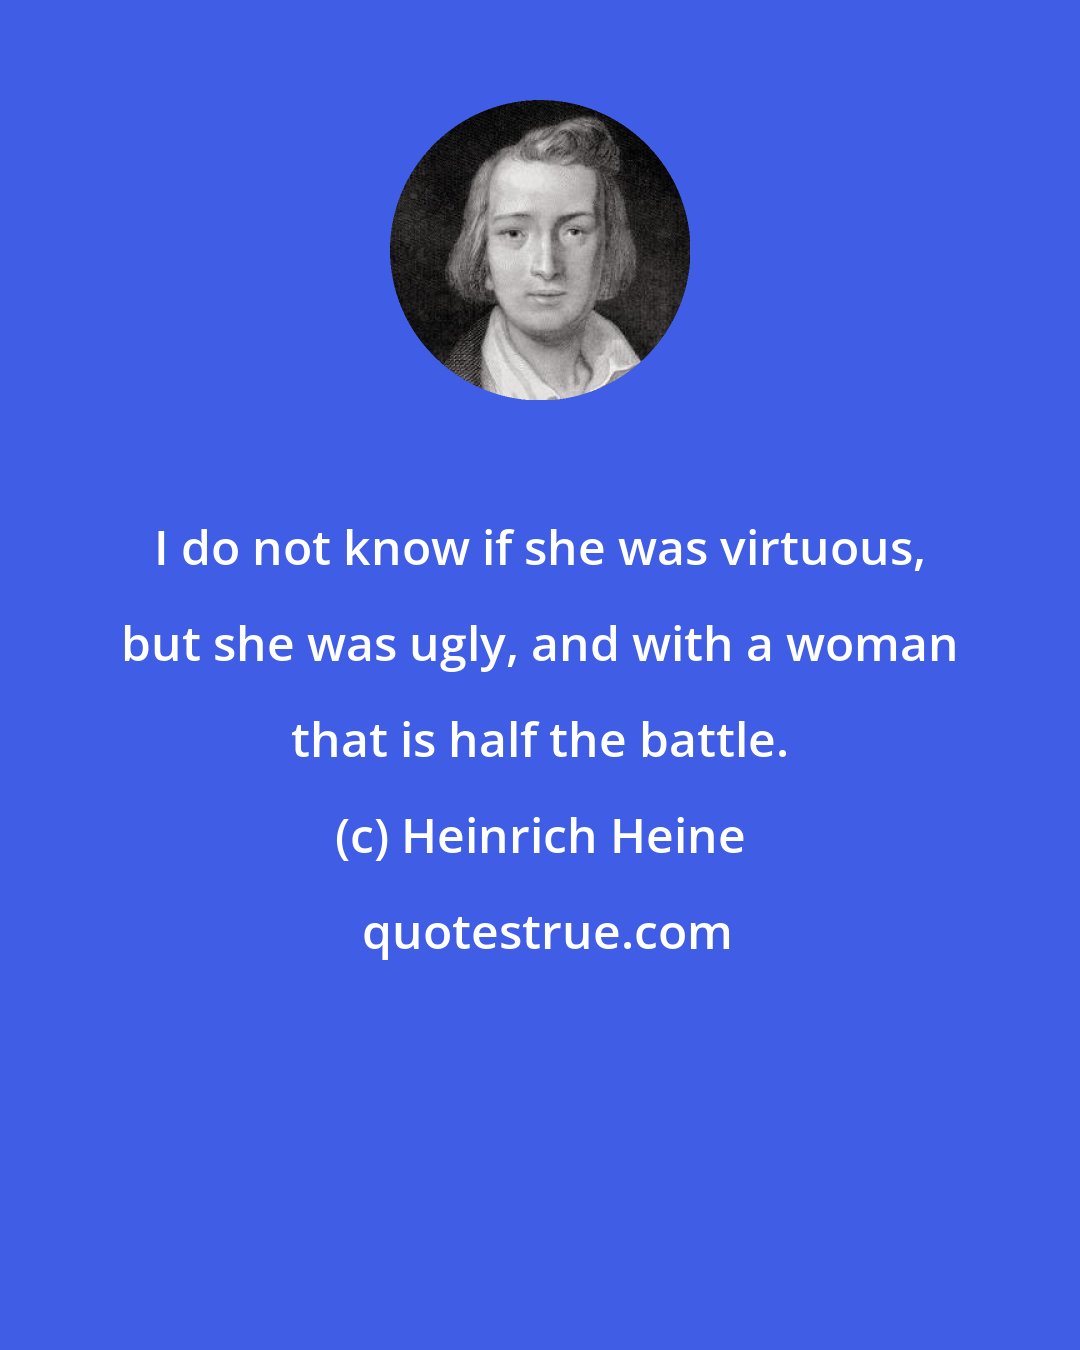 Heinrich Heine: I do not know if she was virtuous, but she was ugly, and with a woman that is half the battle.